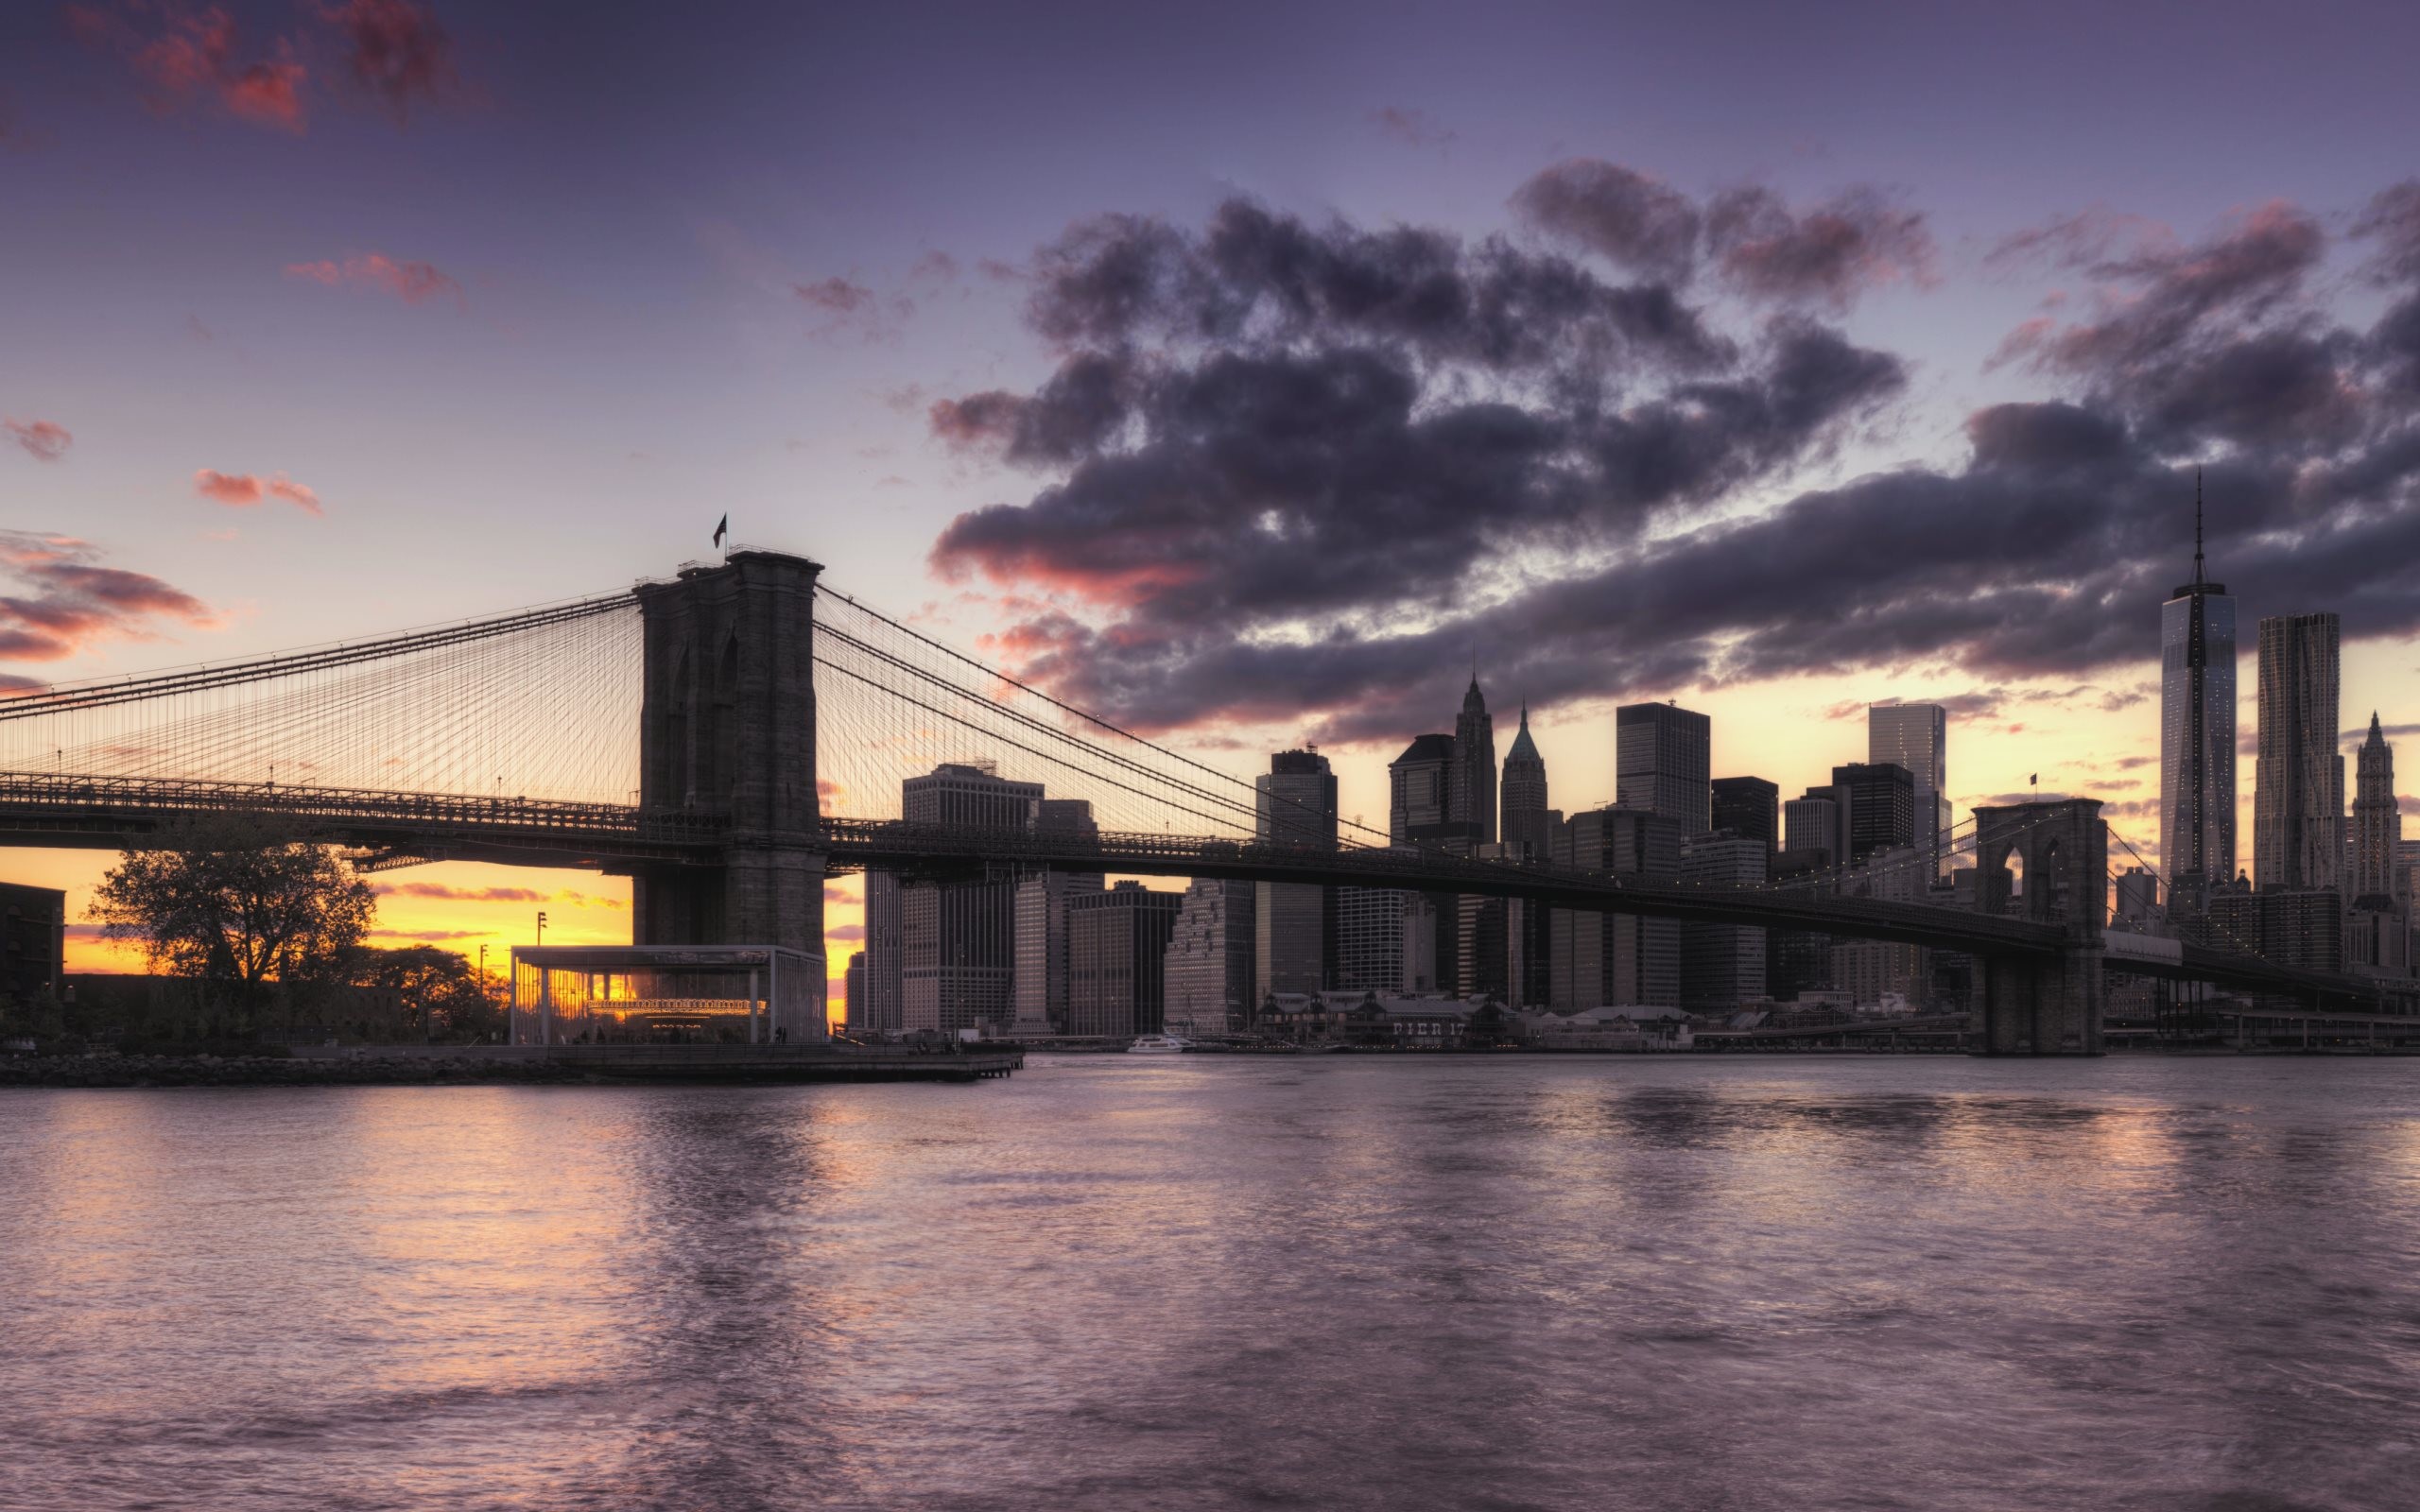 2560x1600 The Brooklyn Bridge from NY, USA photographed by talented American  photographer - John Chandler - and shared in these 2 pictures with his  permission here ...